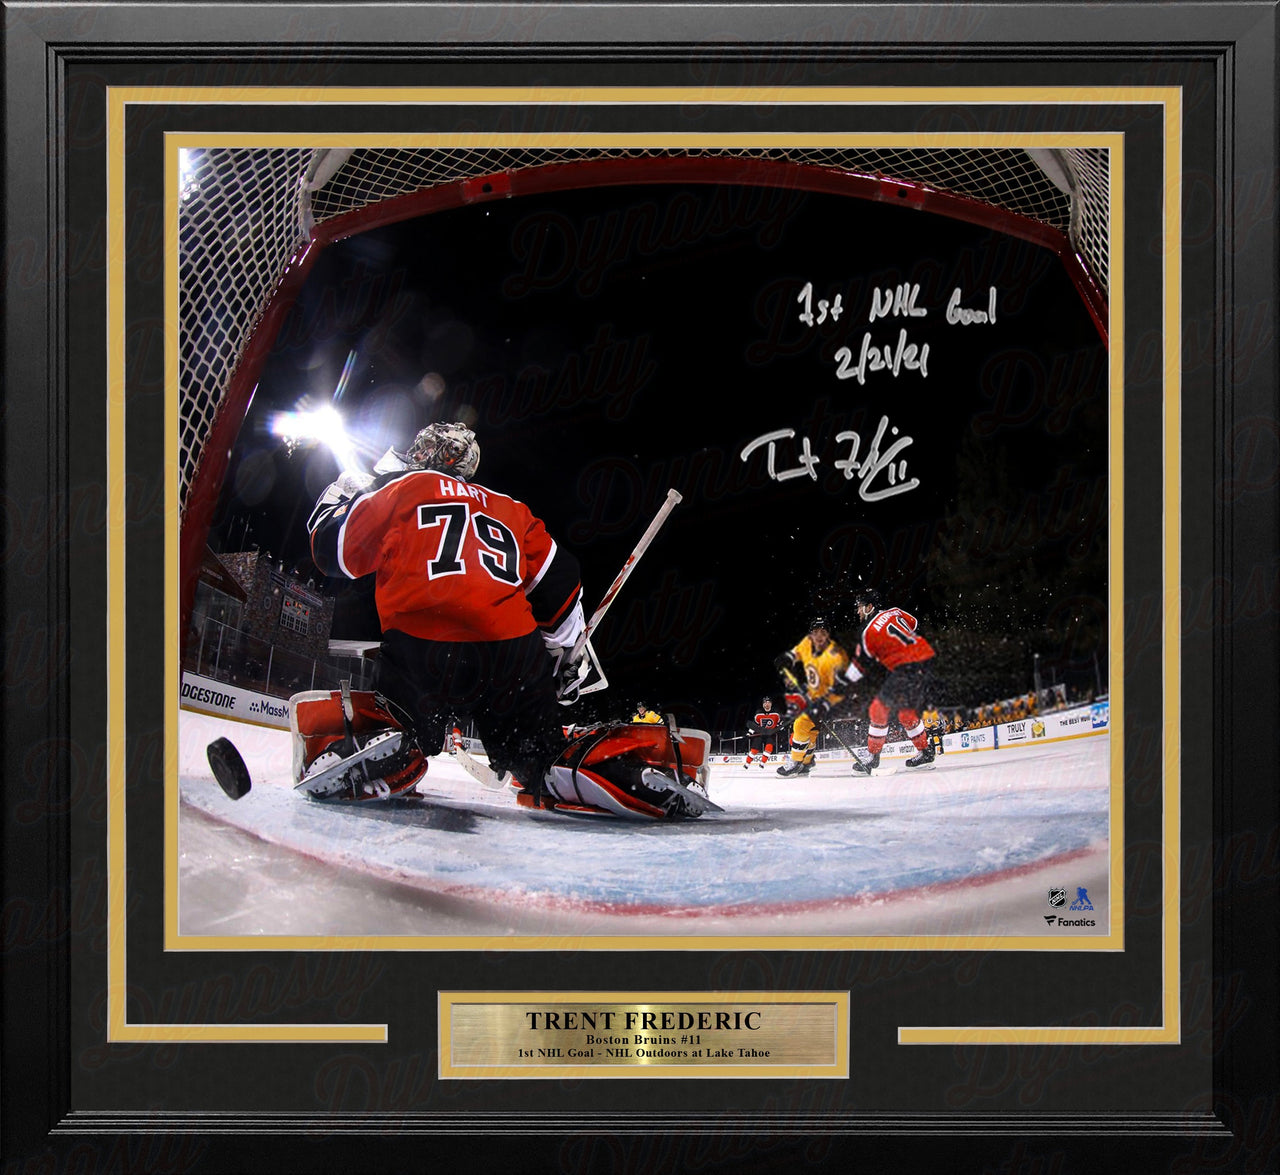 Trent Frederic Boston Bruins Autographed First NHL Goal Photo Framed - Dynasty Sports & Framing 